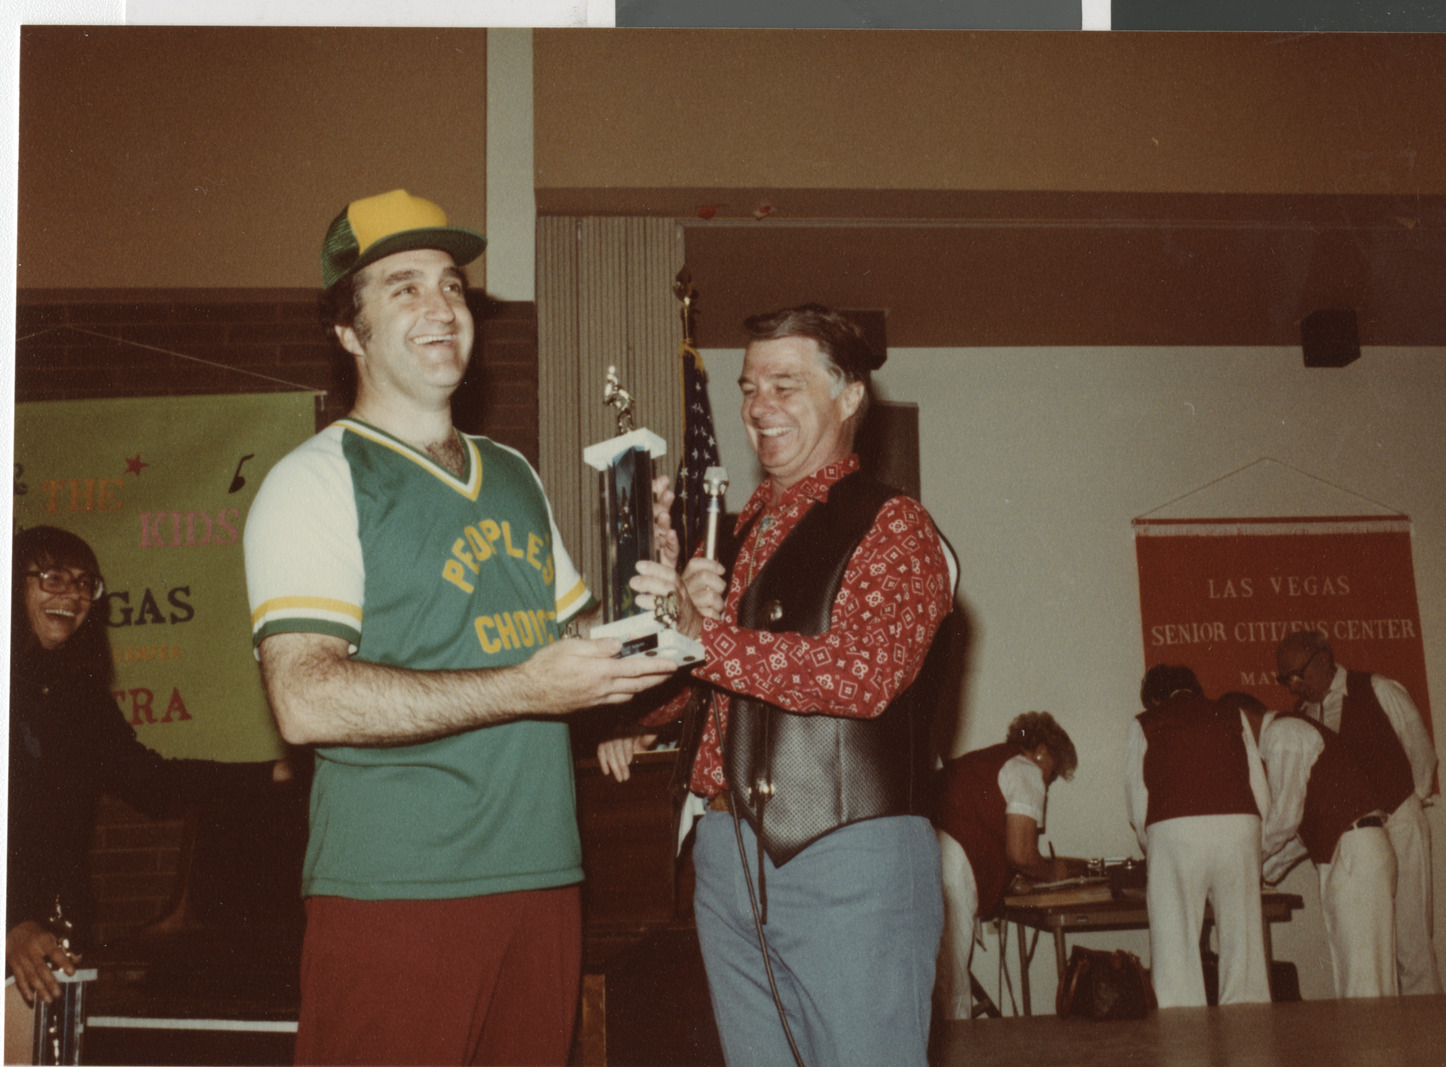 Photograph of Ron Lurie receiving a trophy